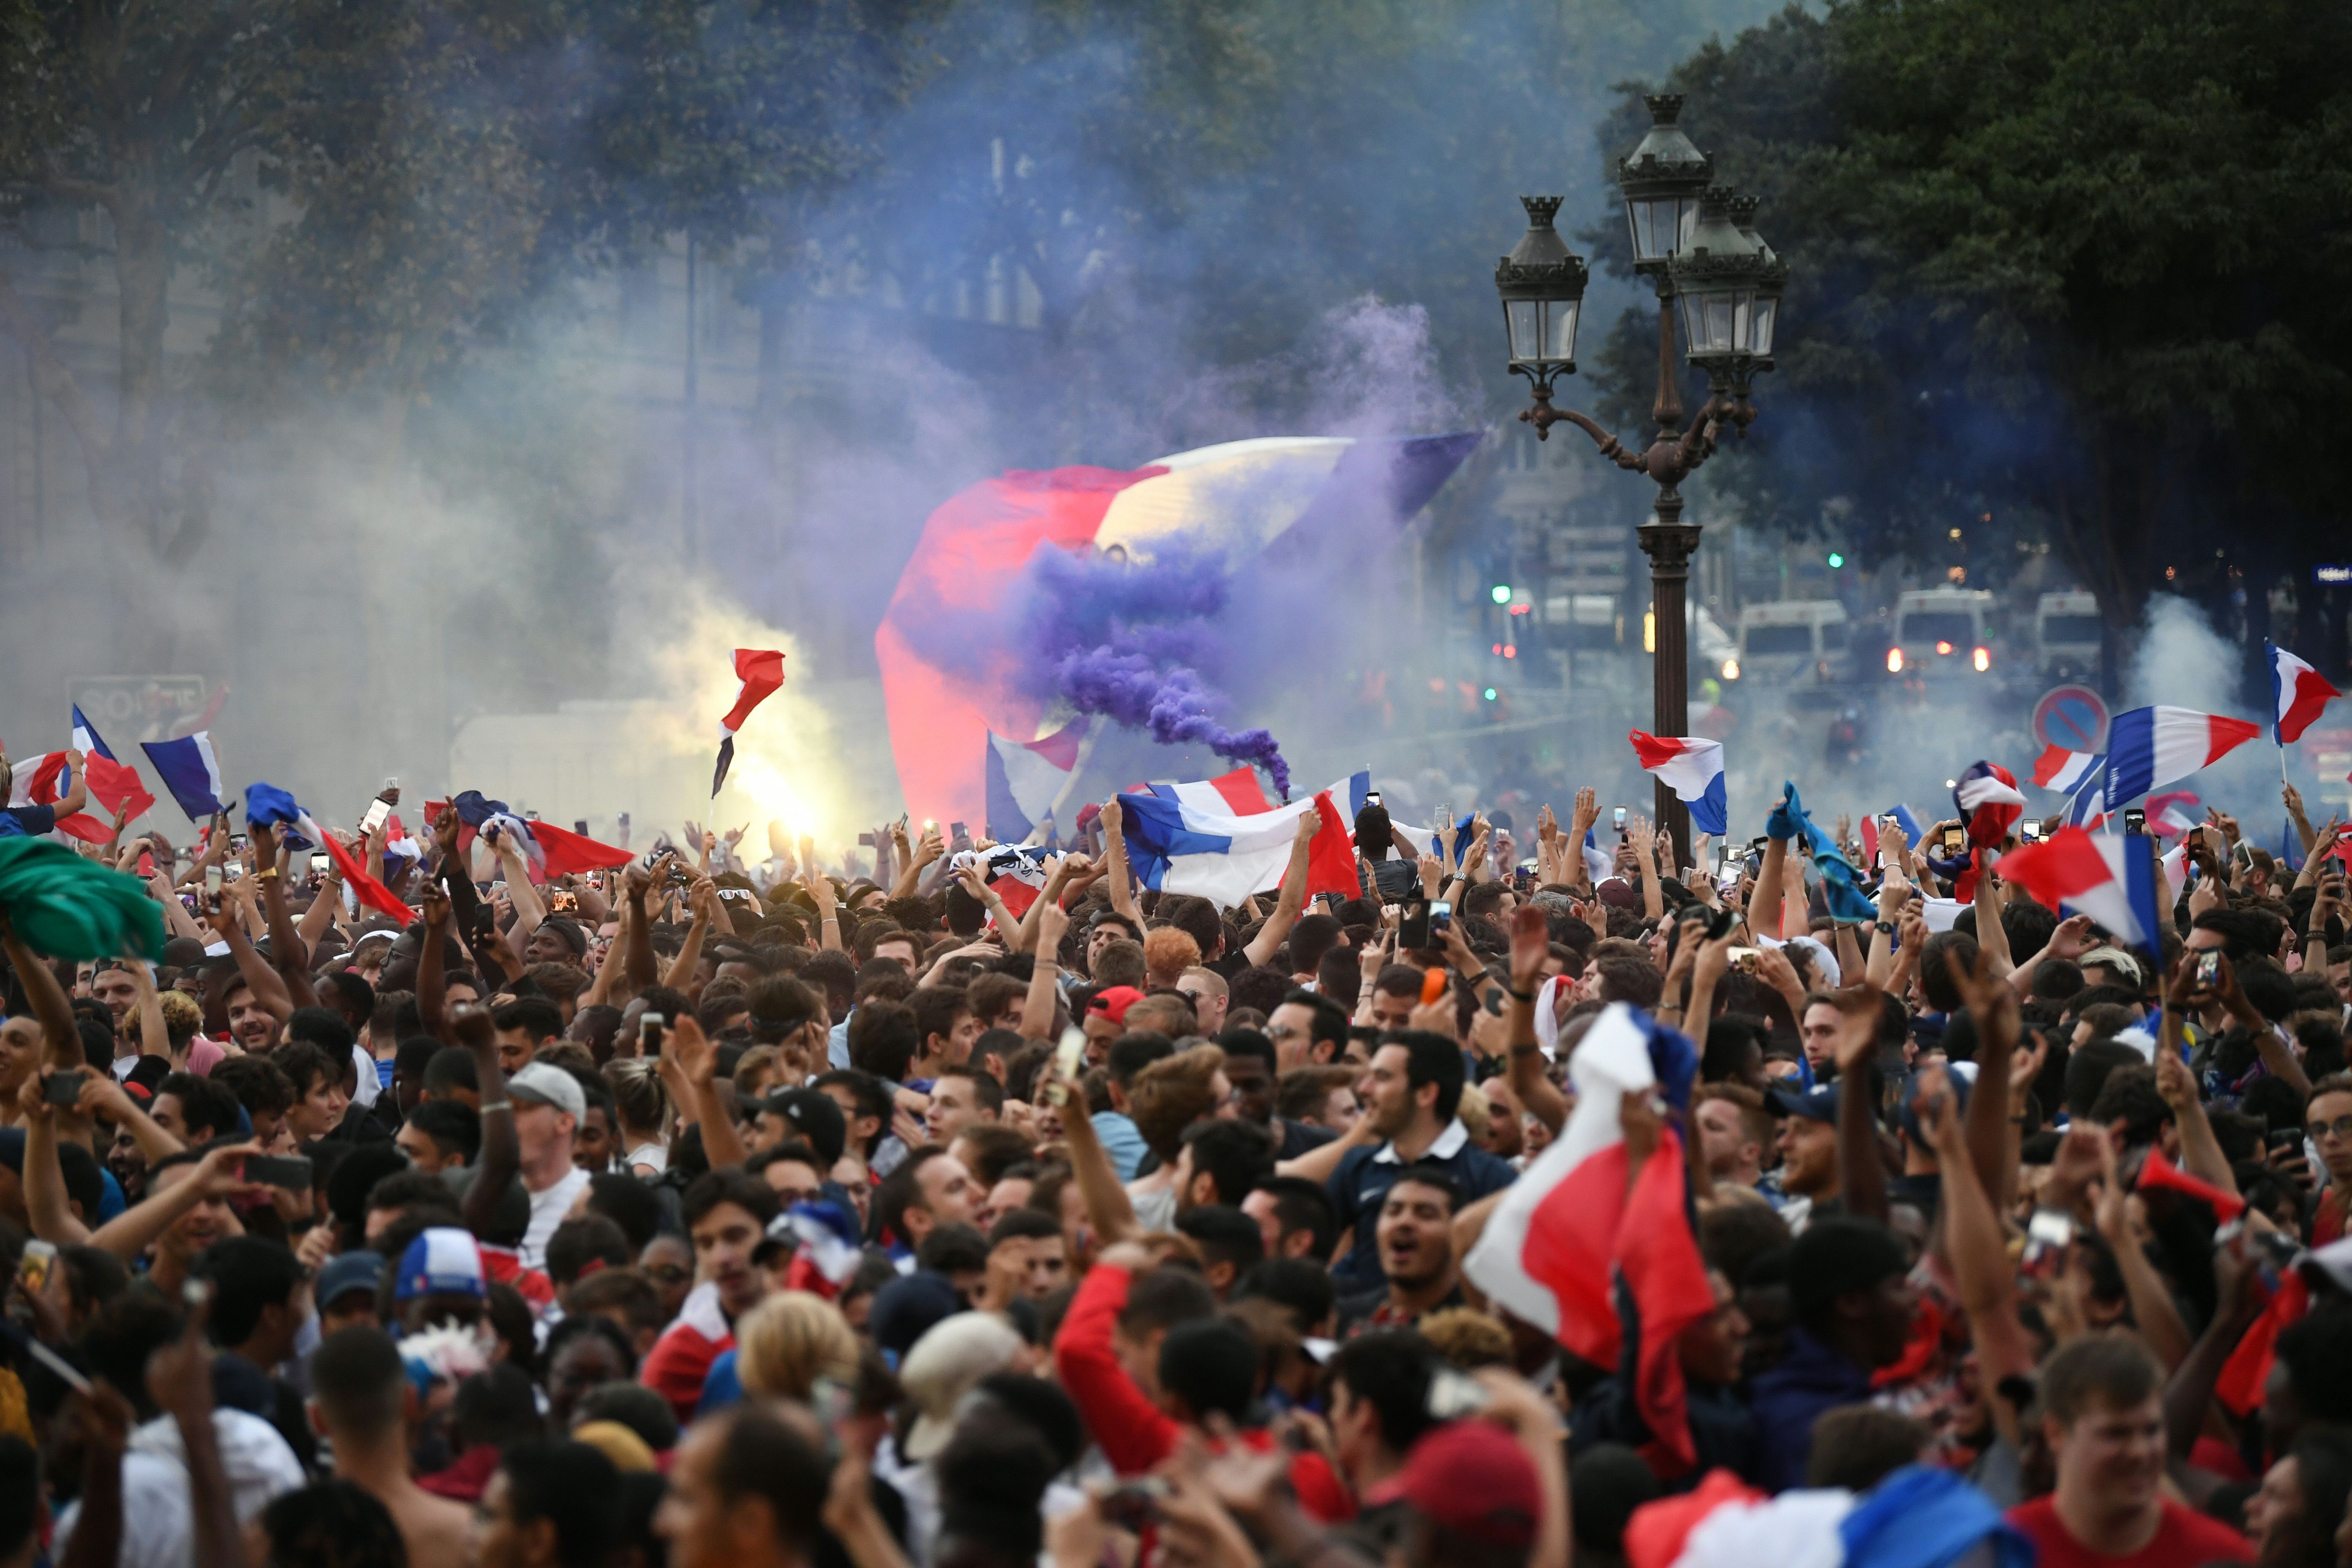 TOPSHOT - People celebrate France's victory at a fan zone in central Paris on July 10, 2018 at the final whistle of the Russia 2018 World Cup semi-final football match between France and Belgium. (Photo by Eric FEFERBERG / AFP) (Photo credit should read ERIC FEFERBERG/AFP/Getty Images)